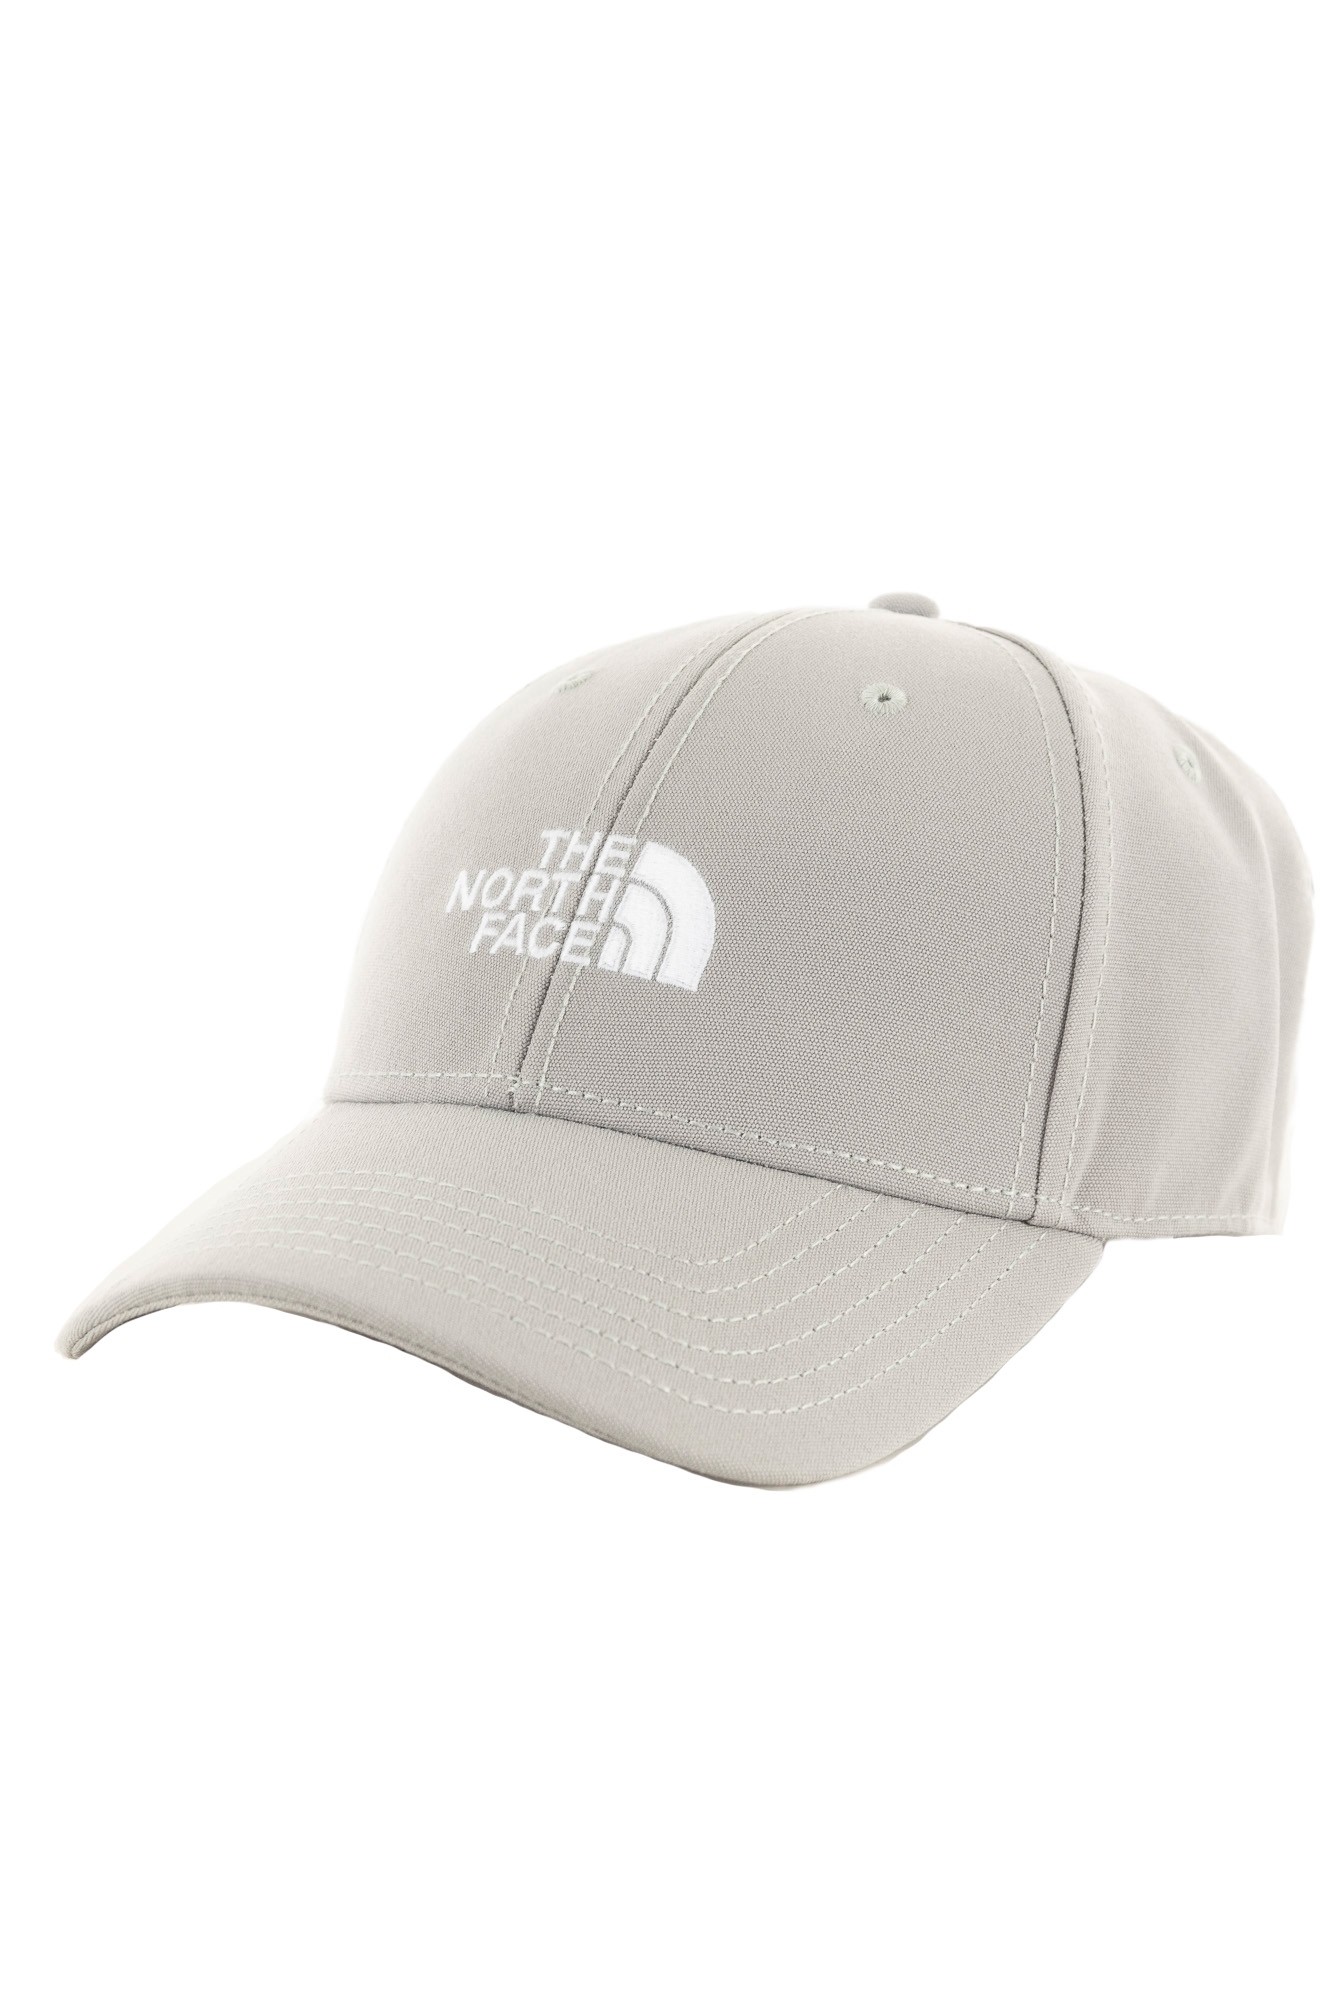 The North Face - 66 Classic - Casquette - Gris - GREY